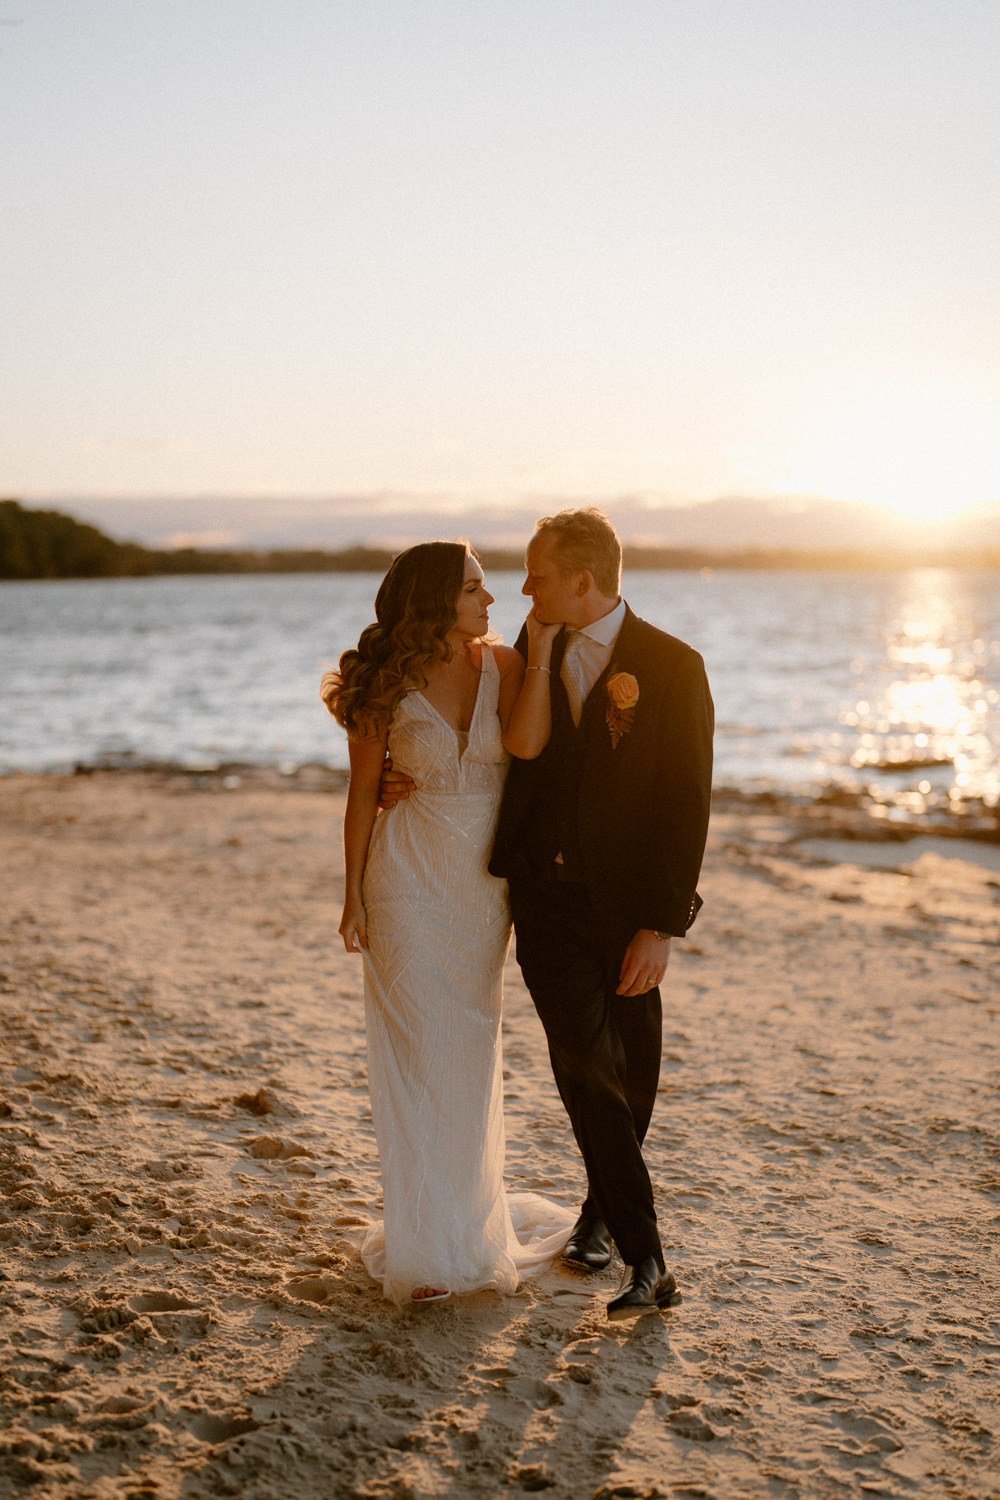 A stunning bride and groom walking on the beach at sunset for their Worrowing Jervis Bay wedding.